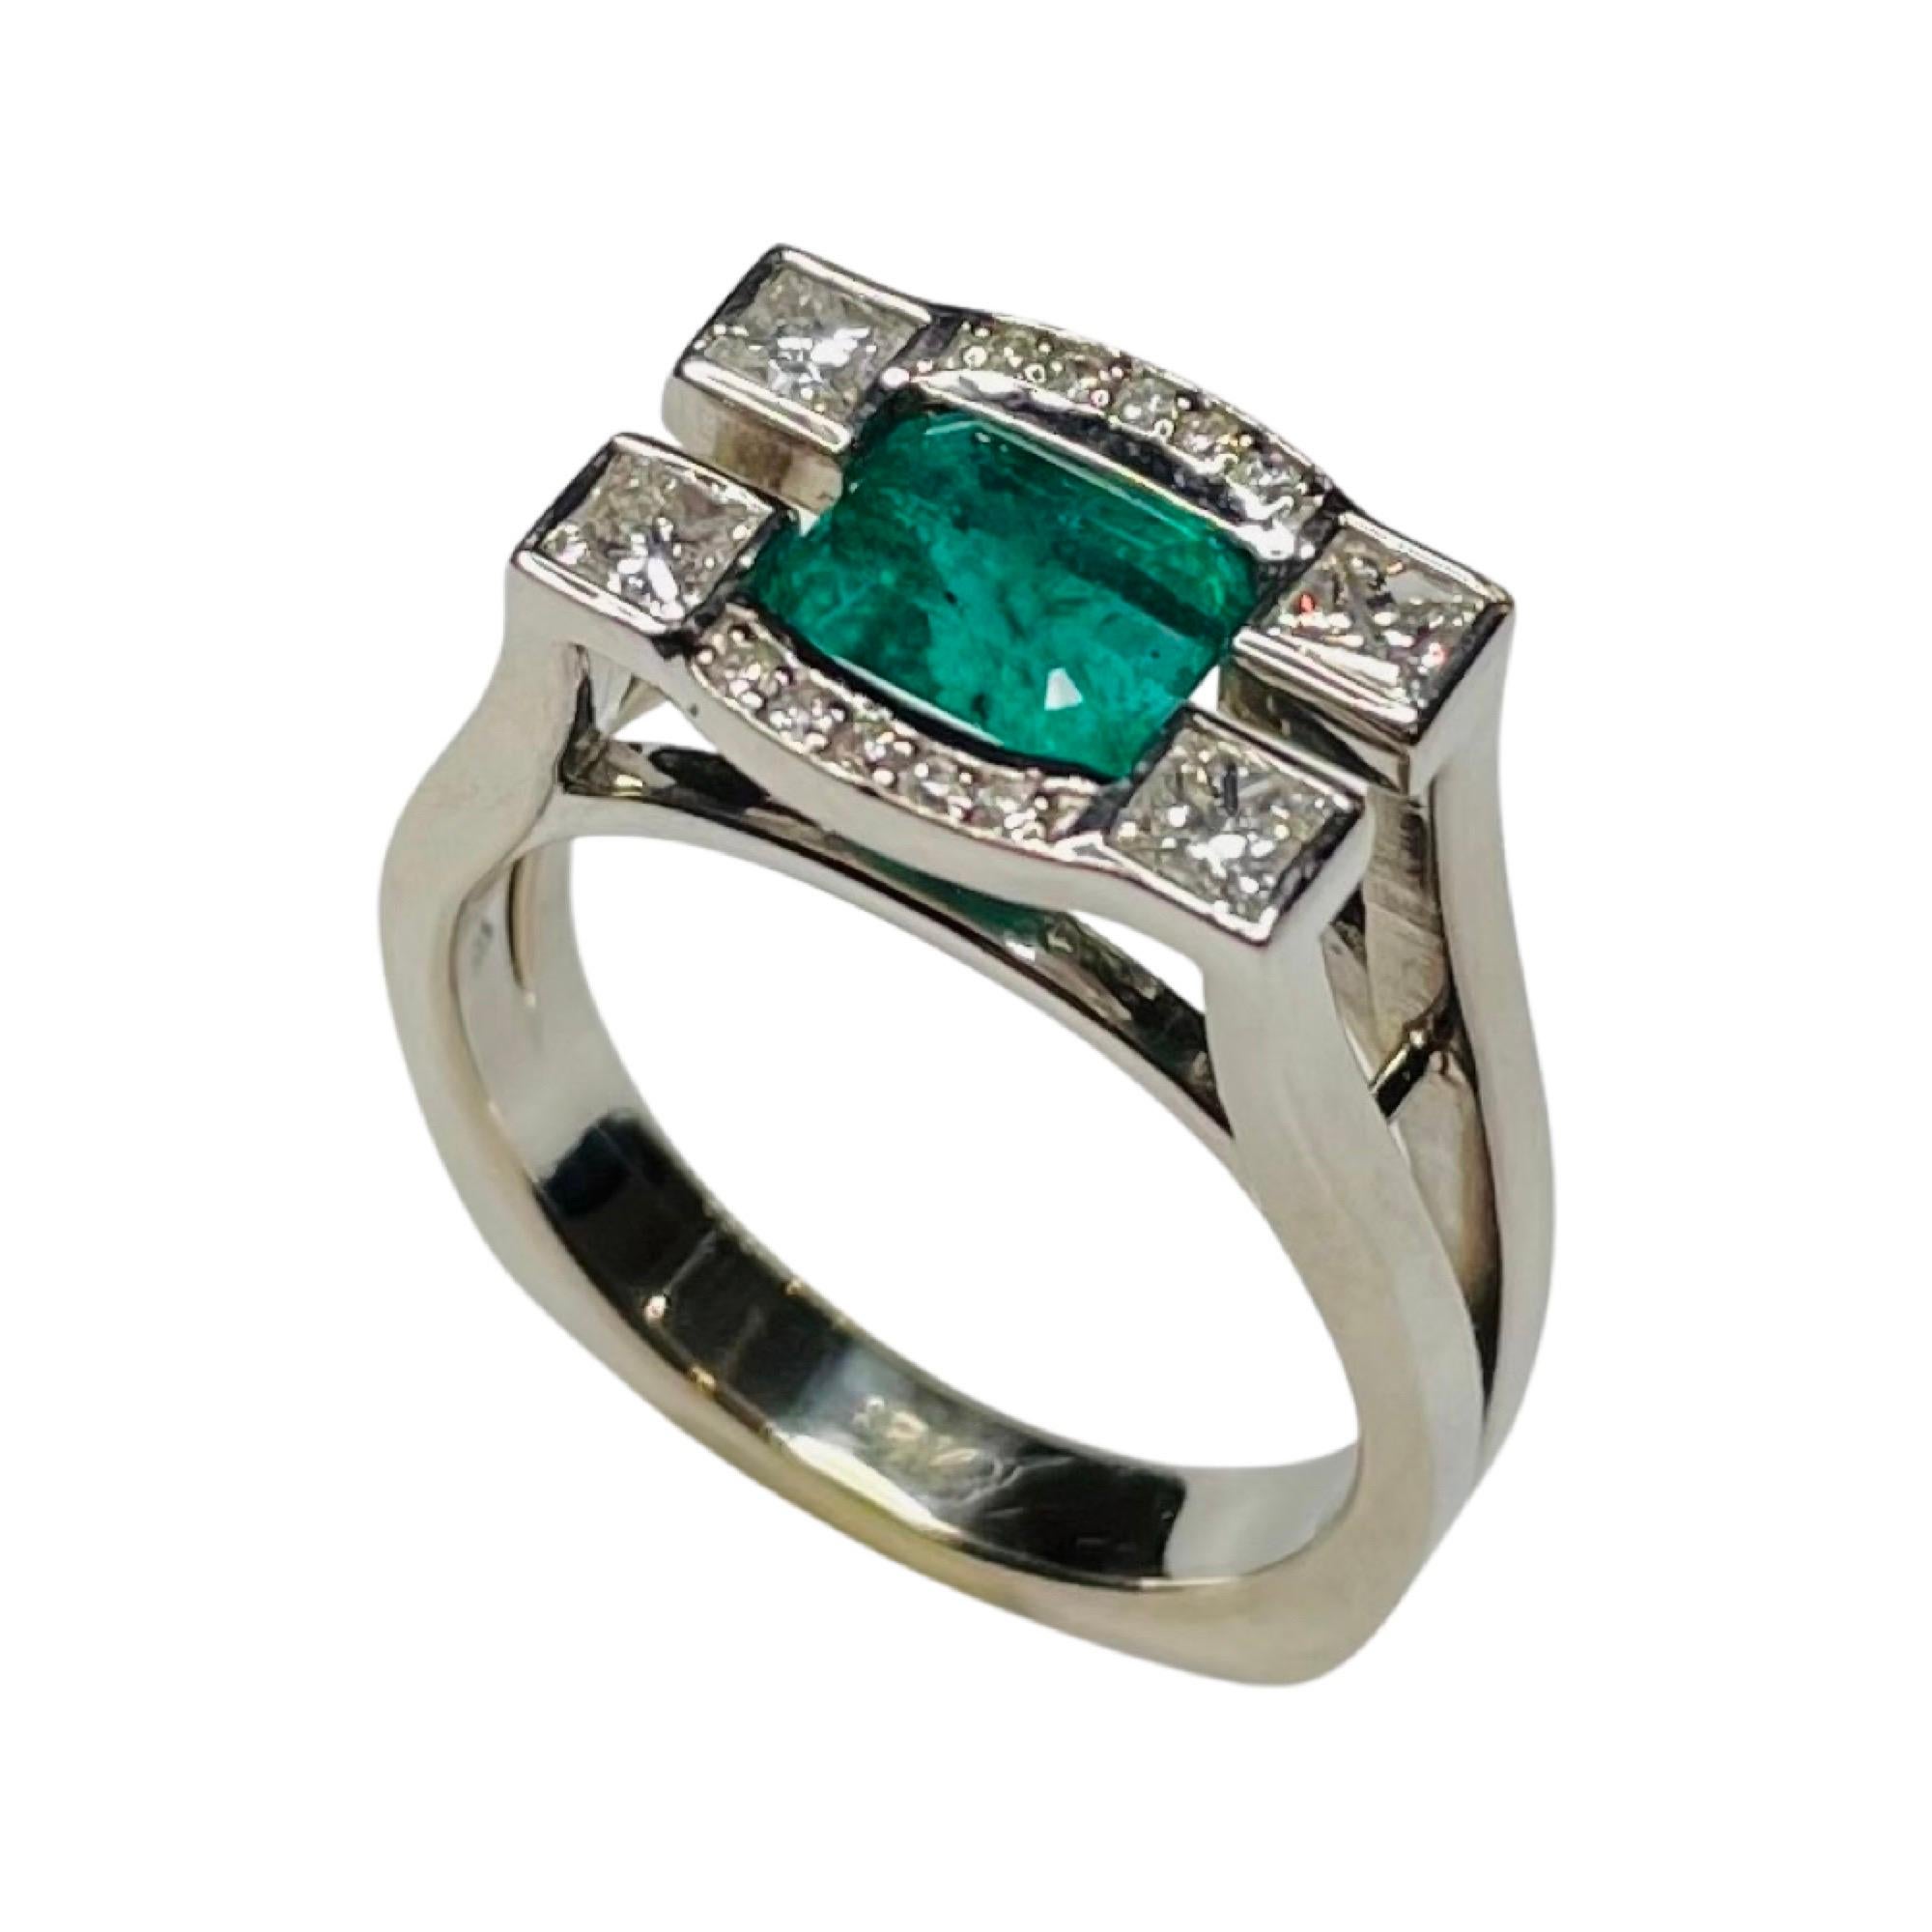 Lithos 18K White Gold Emerald and Diamond Ring. The natural emerald is channel set. It weighs 1.38 carats, It measures 6.38 mm x 5.92 mm x 4.87 mm, It has an AGL Cert # 49343. There are 10 full cut round brilliant diamonds, bead set, for a total